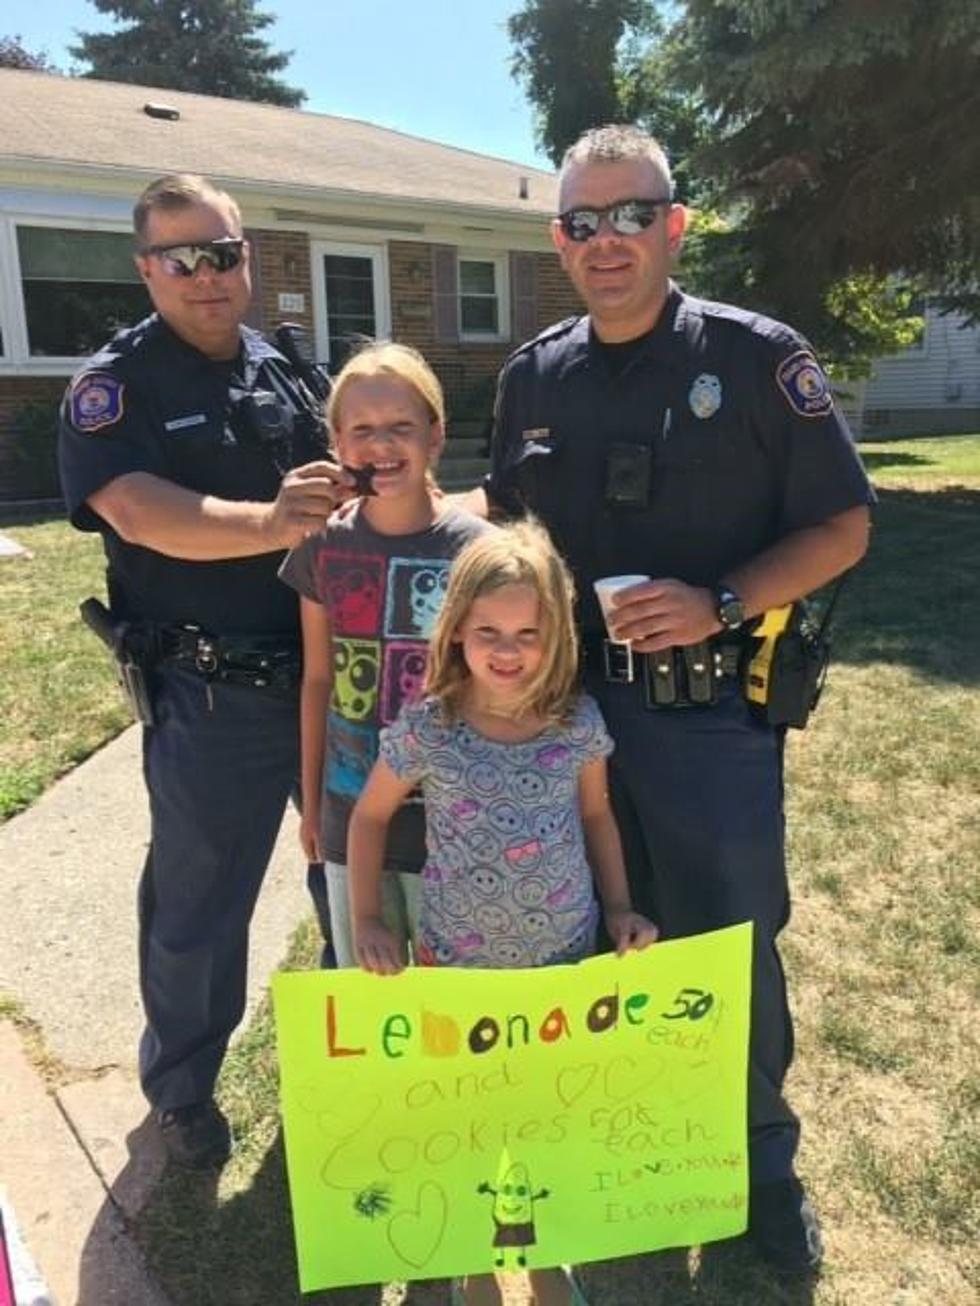 PEOPLE DOING GOOD: GRPD Is At It Again!